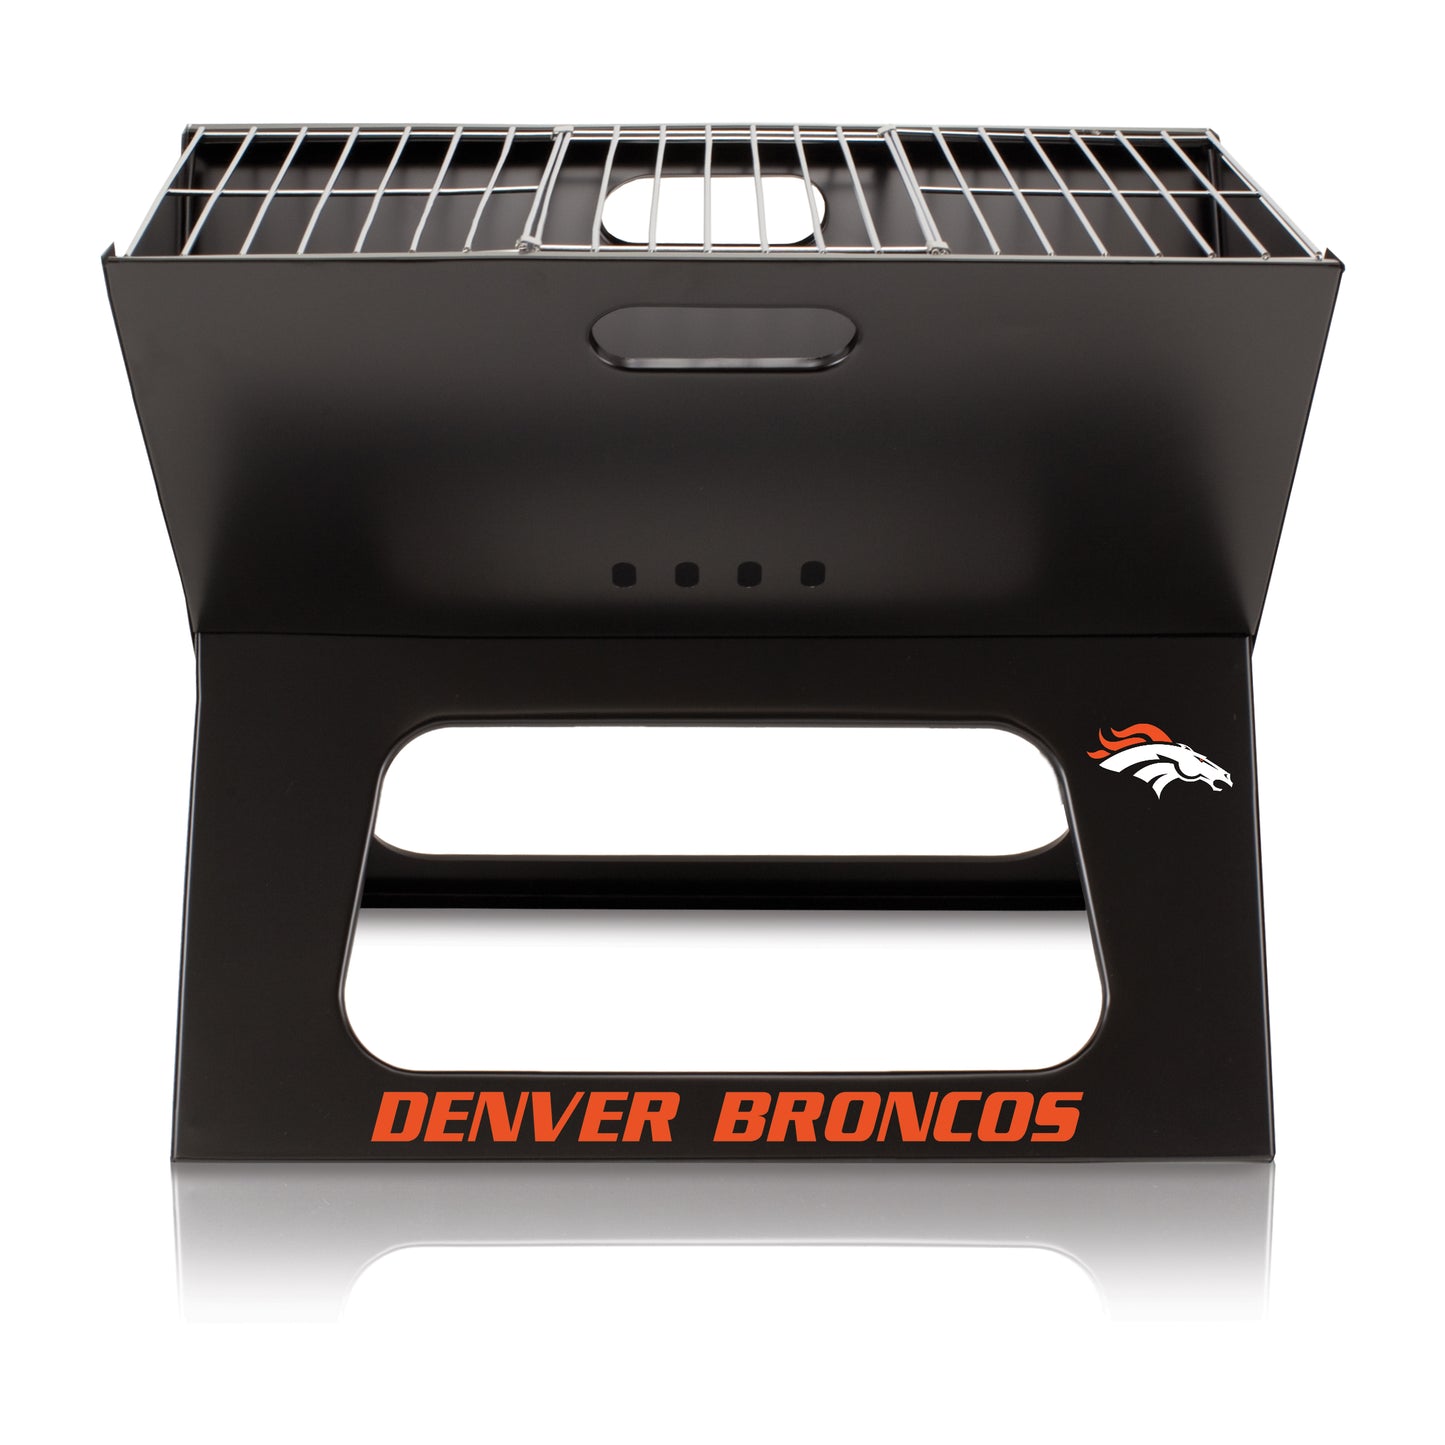 Denver Broncos - X-Grill Portable Charcoal BBQ Grill